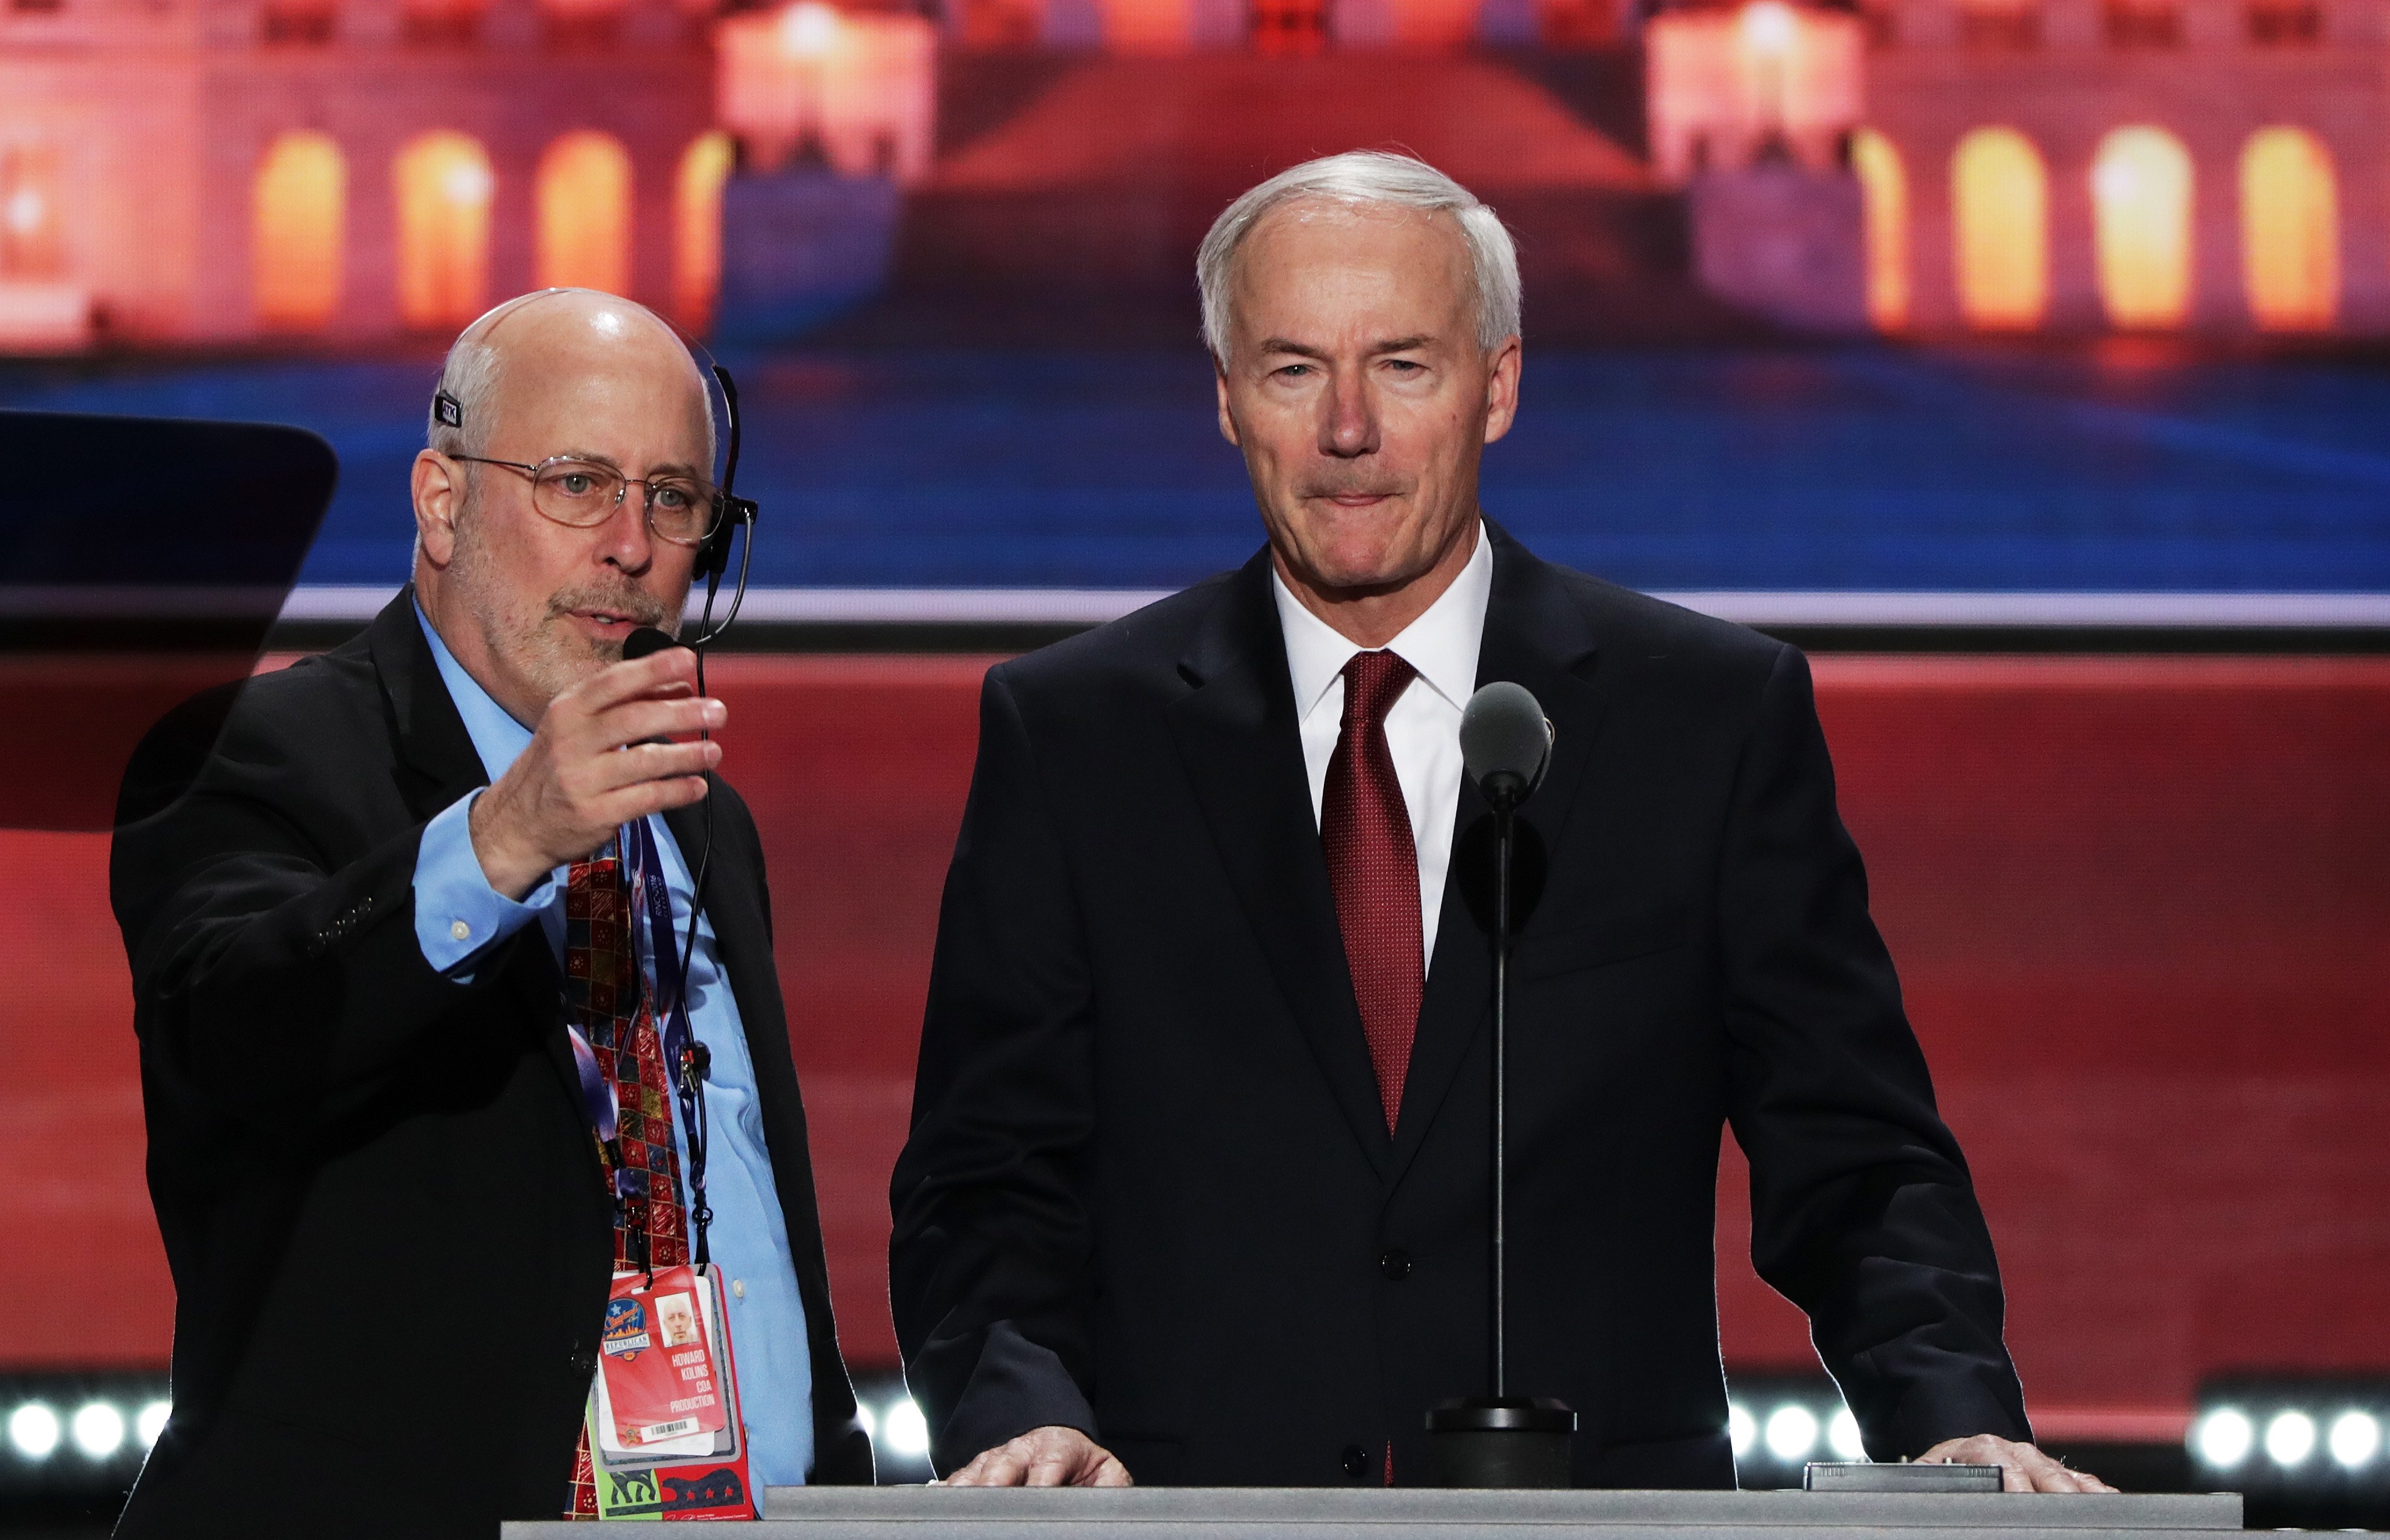 Arkansas Governor Asa Hutchinson stands on stage prior to the start of the second day of the Republican National Convention on July 19, 2016 at the Quicken Loans Arena in Cleveland. (Alex Wong—Getty Images)